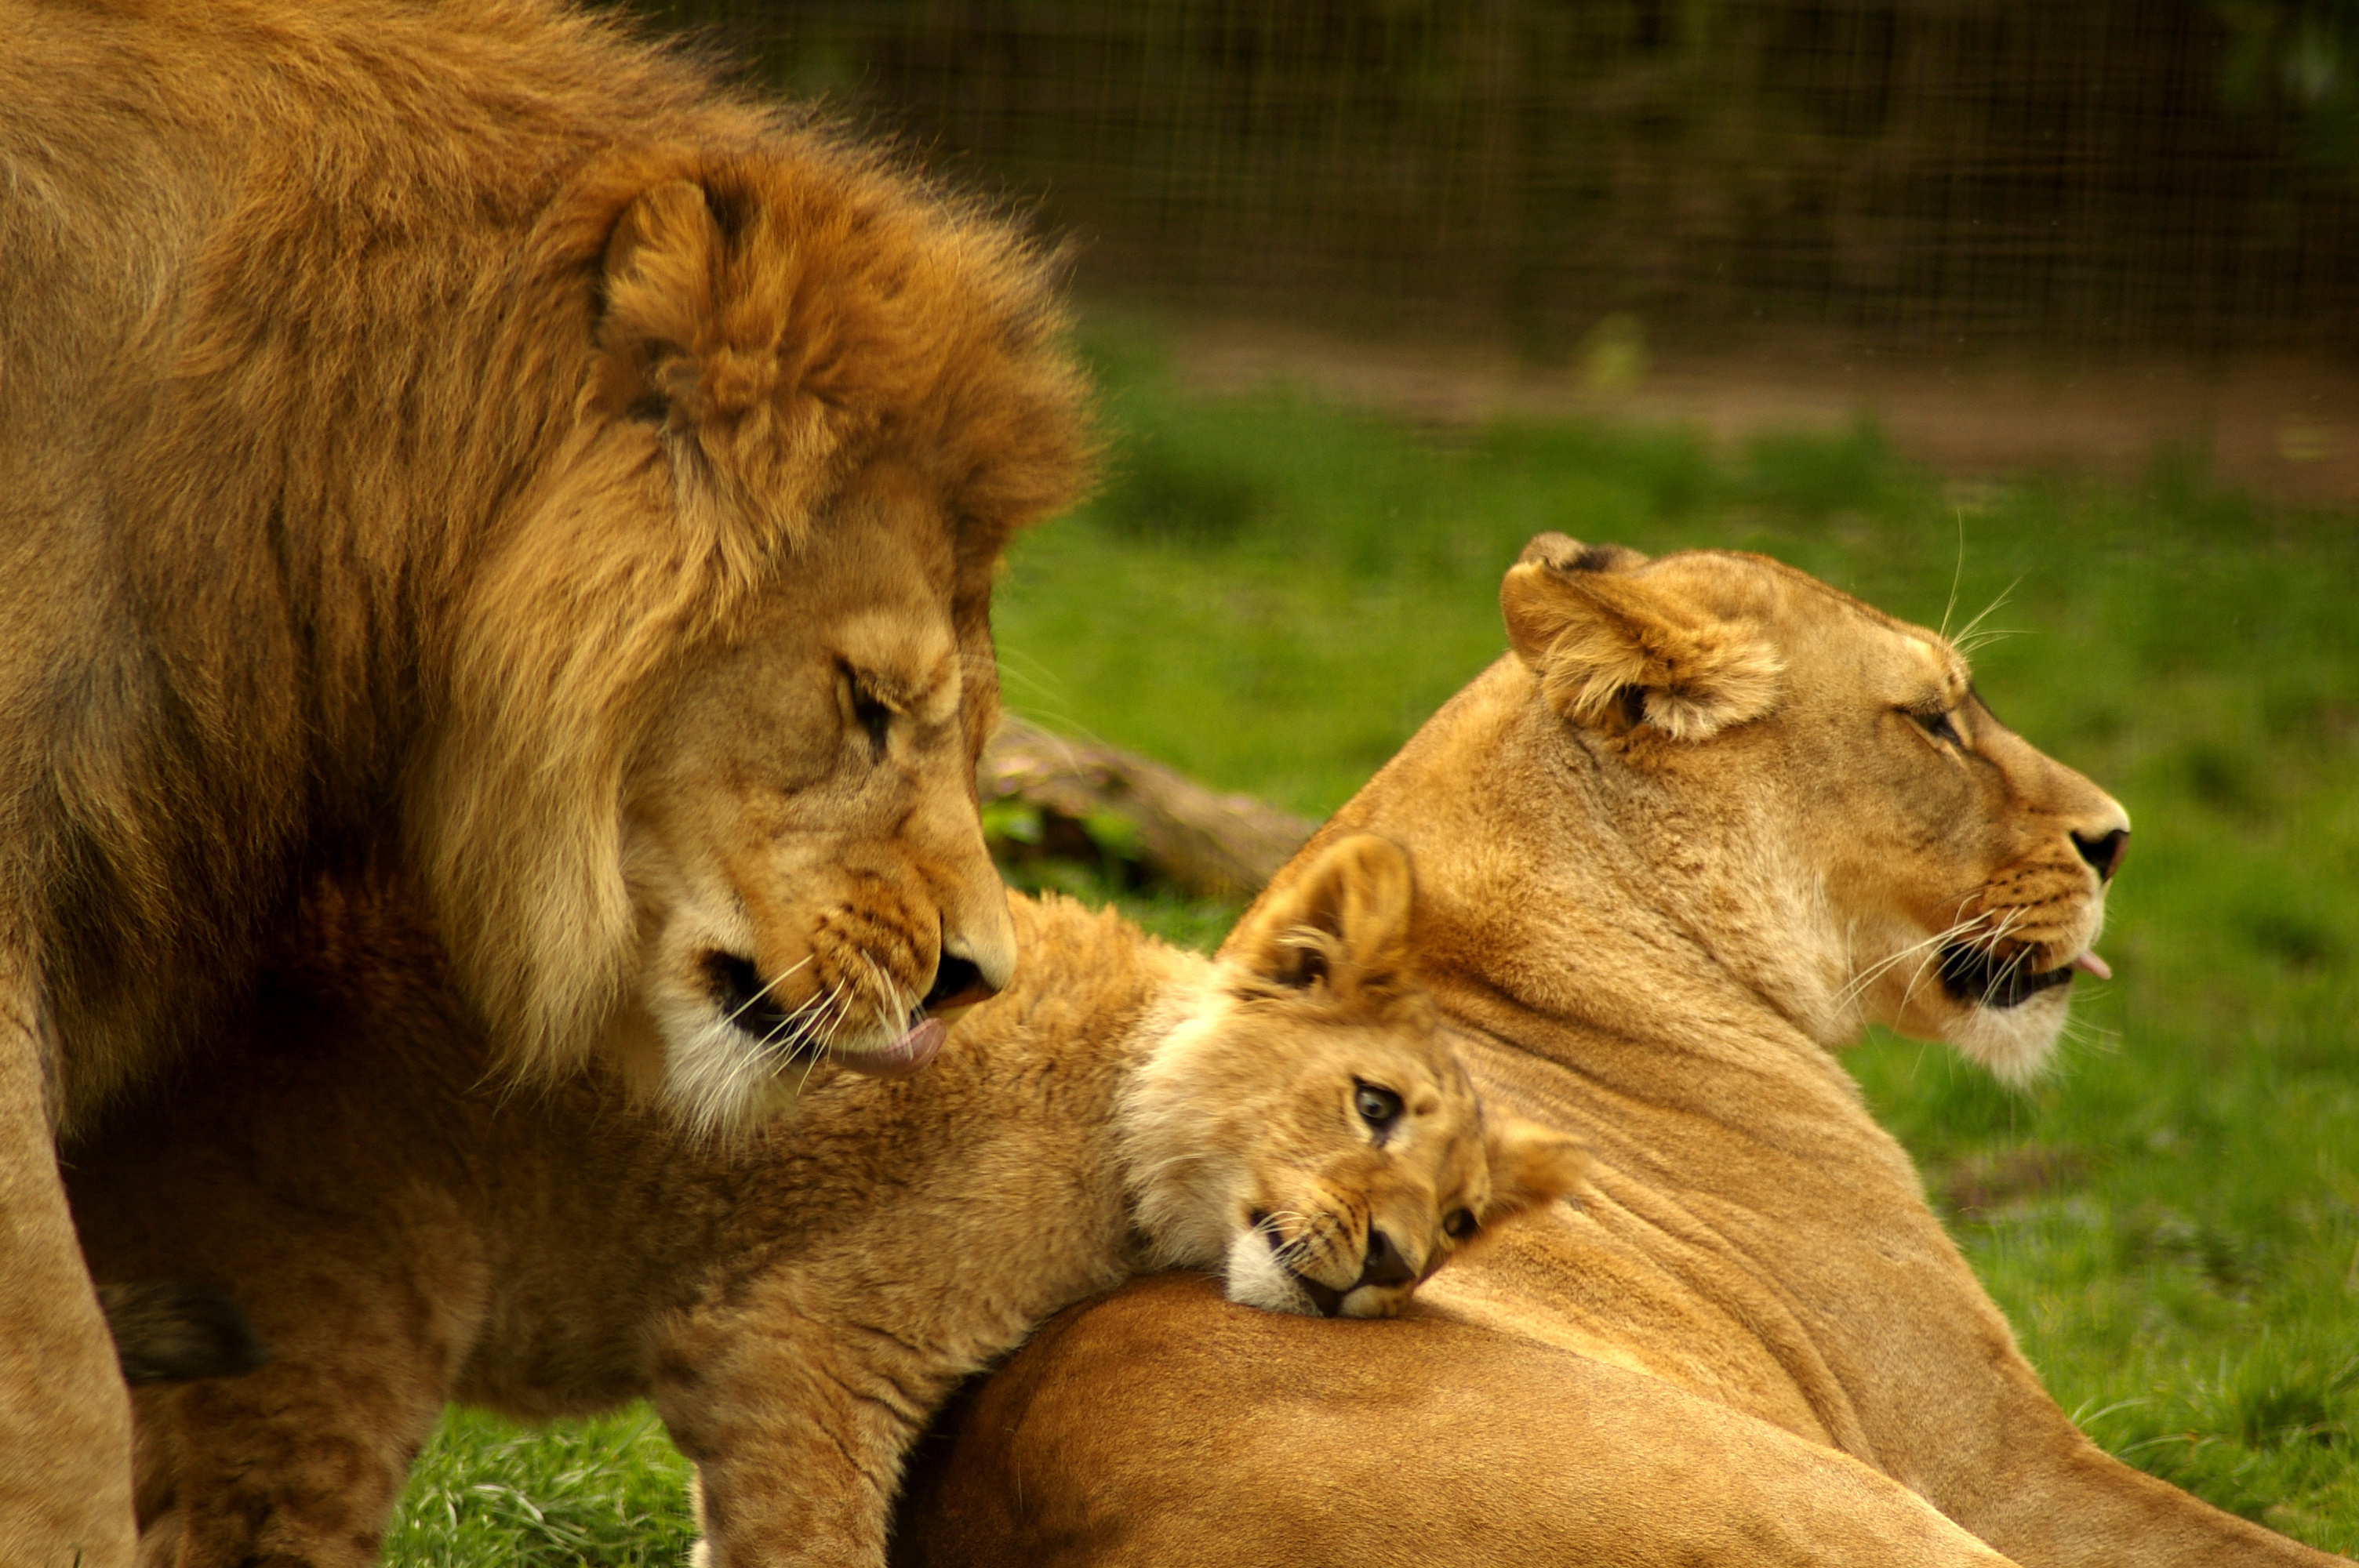 Wallpaper | Animals | photo | picture | lions, family, photo, zoo